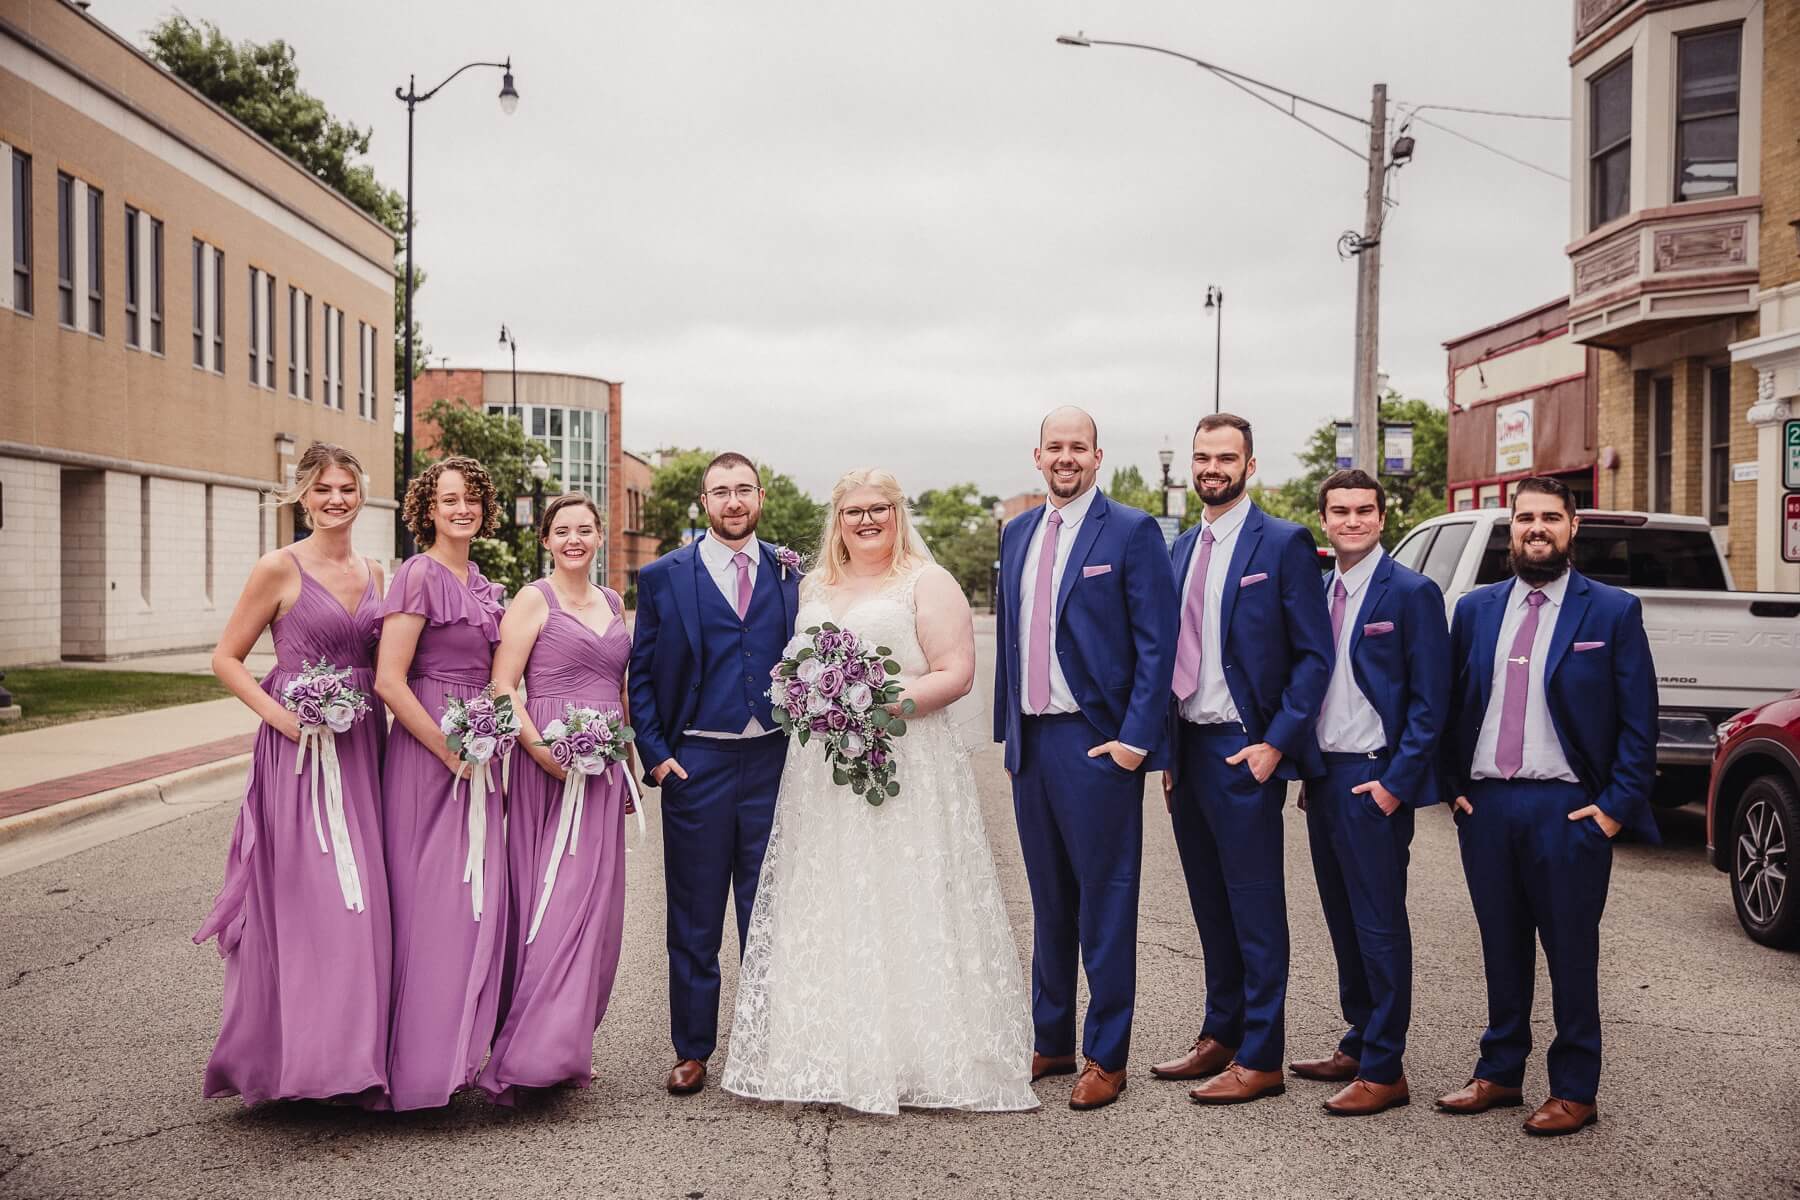 Bride and groom with bridesmaids in purple dresses and groomsmen in blue suits